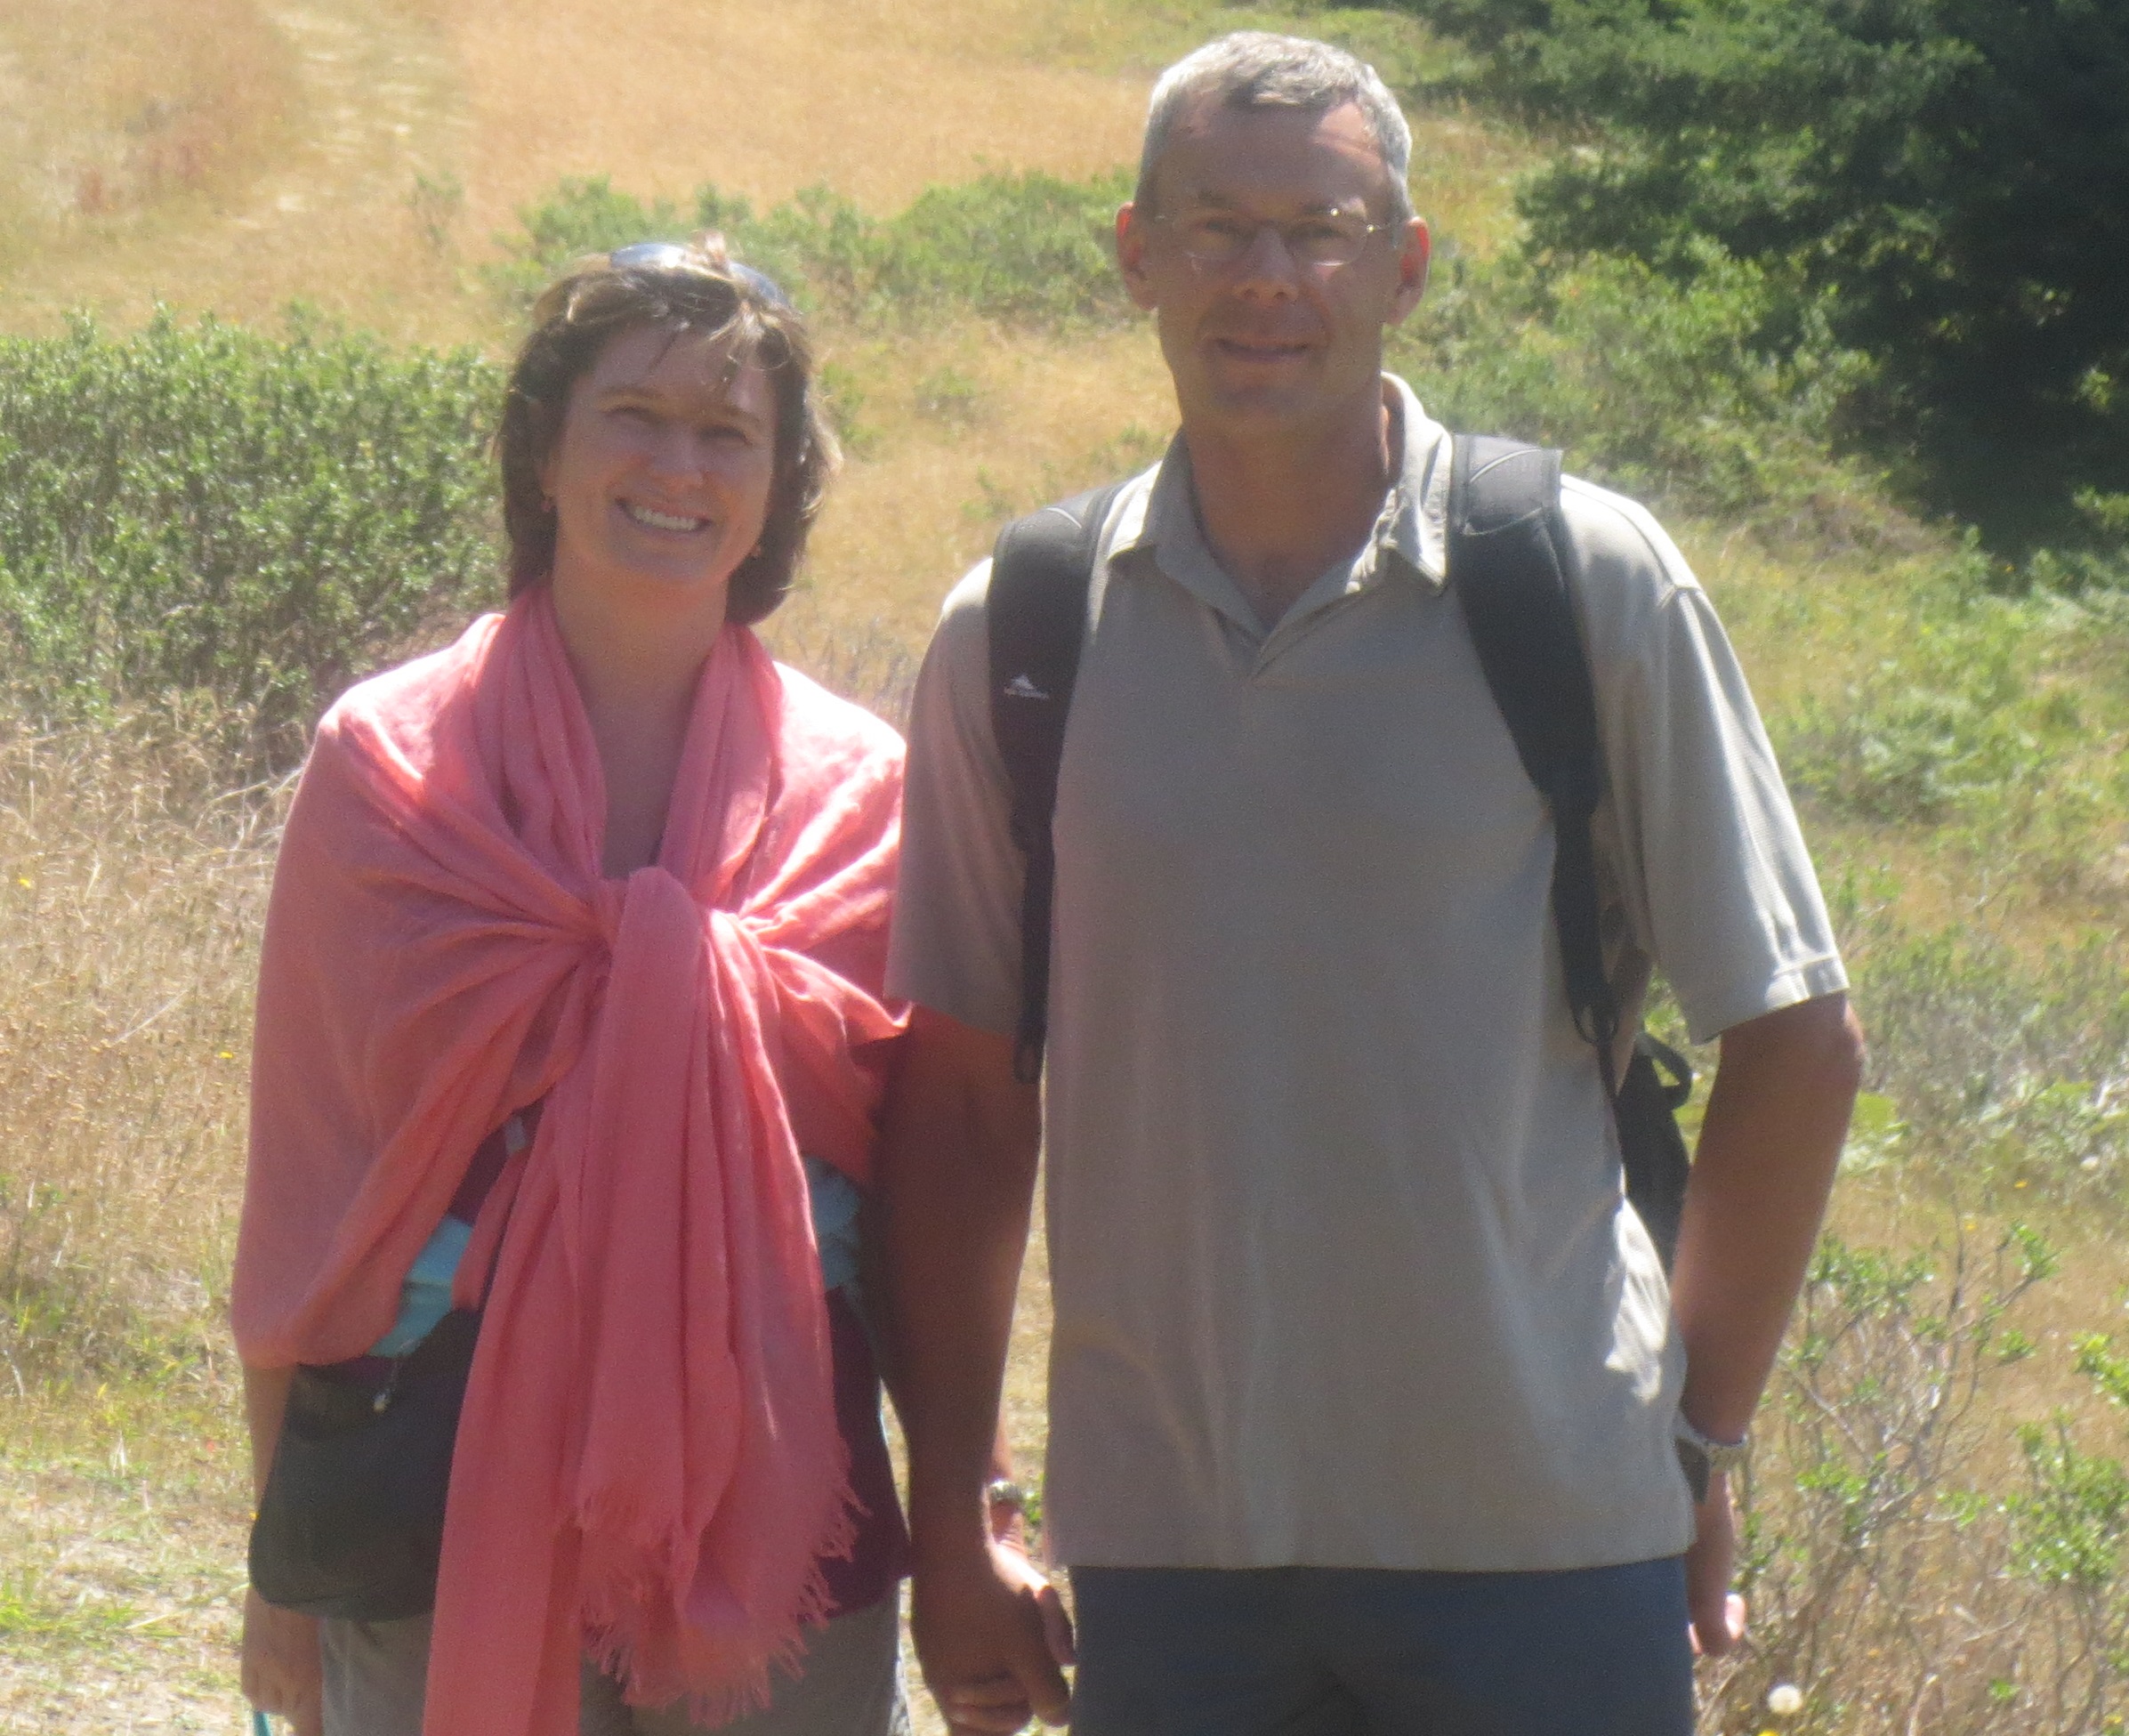 Alla and Sergei pose while hiking at the Sea Ranch in Sonoma County, California.